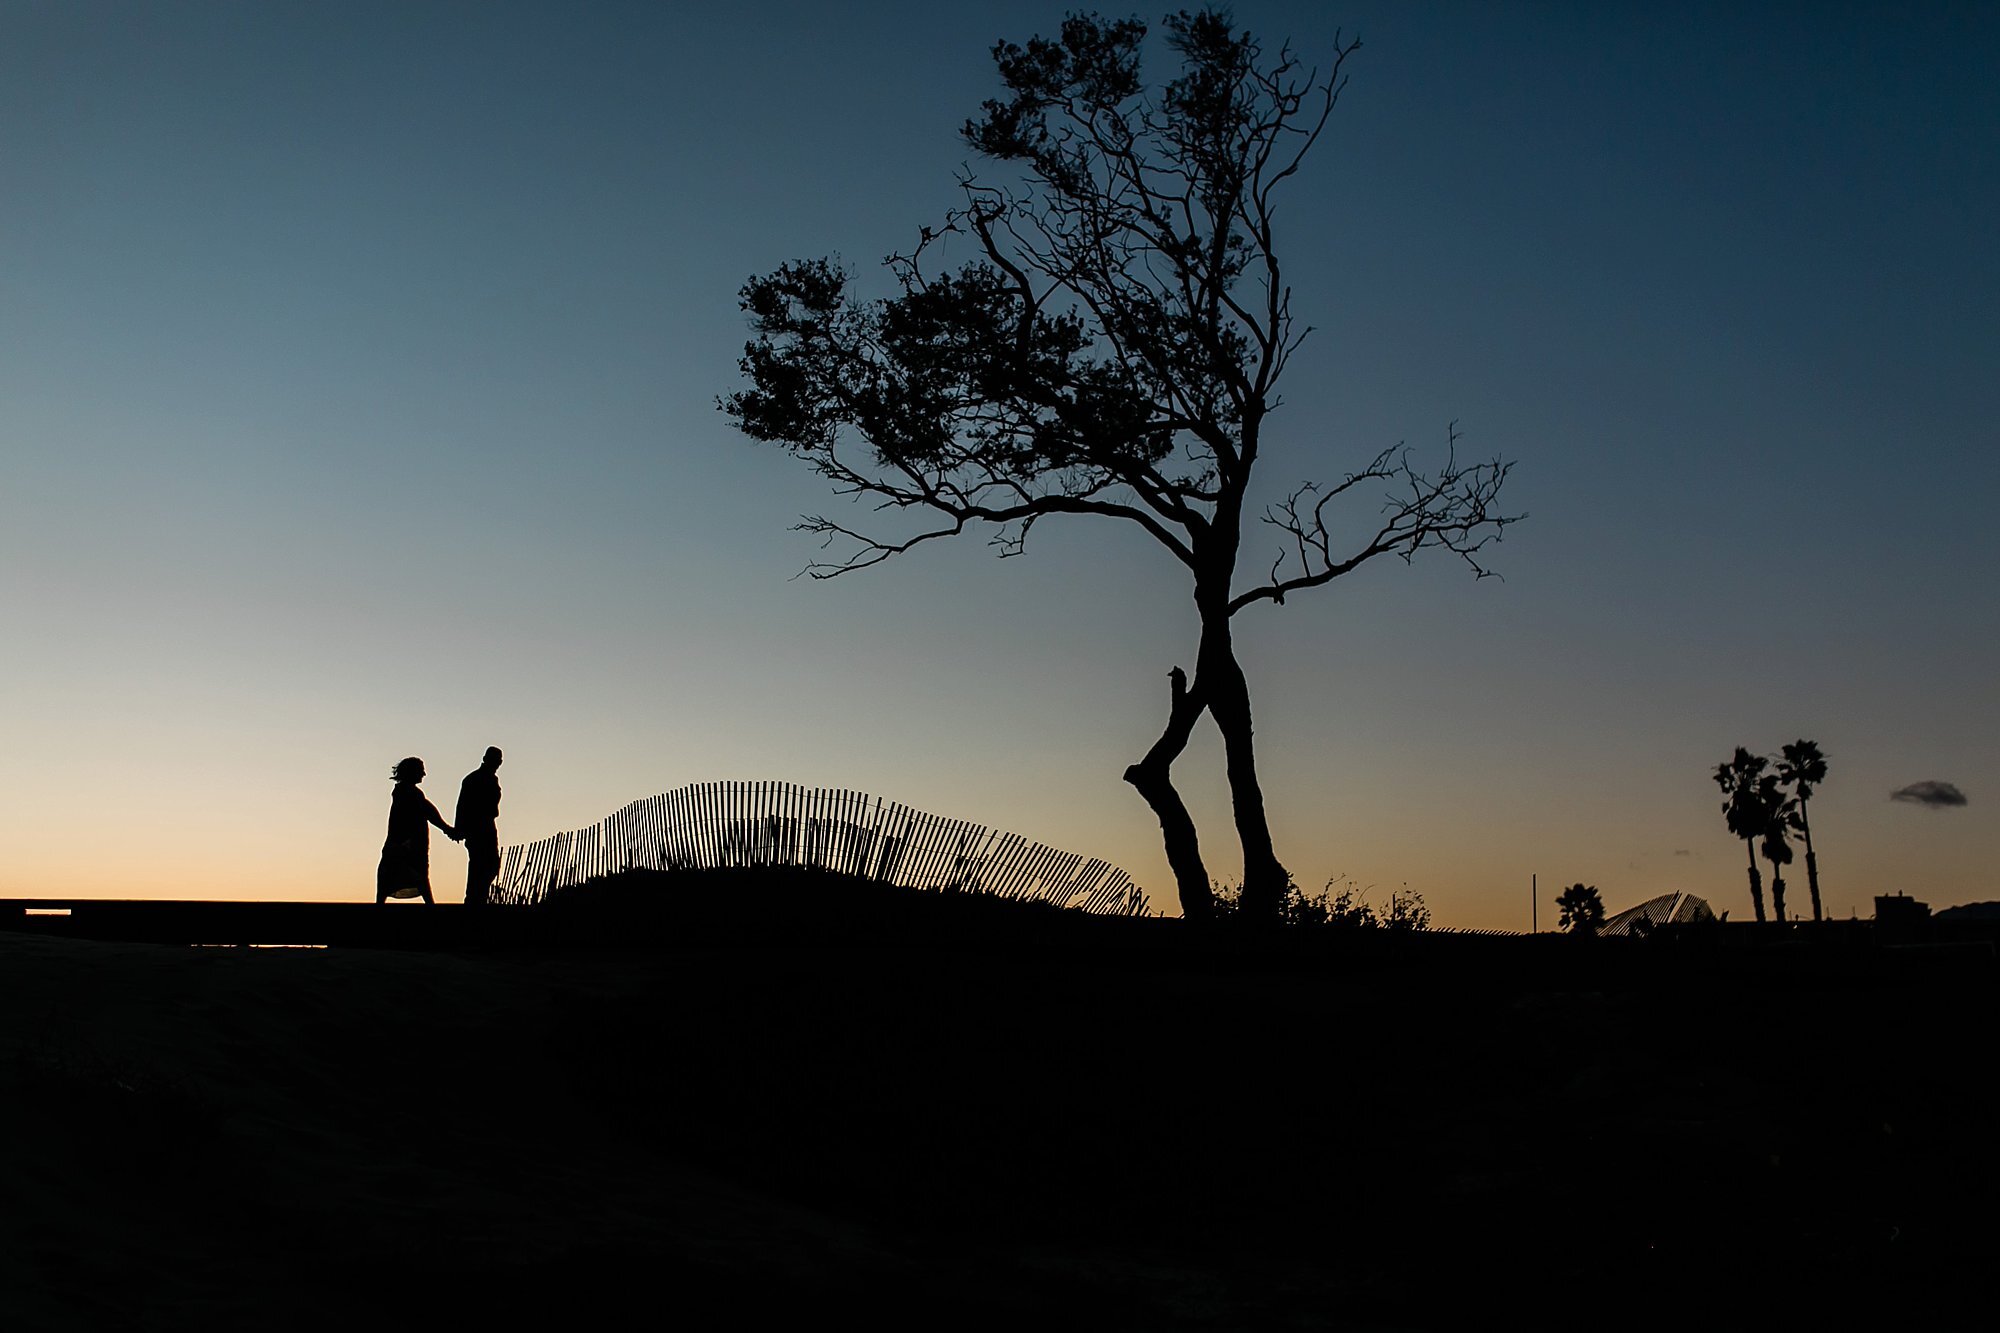  sunset with tree ad couple silhouette 